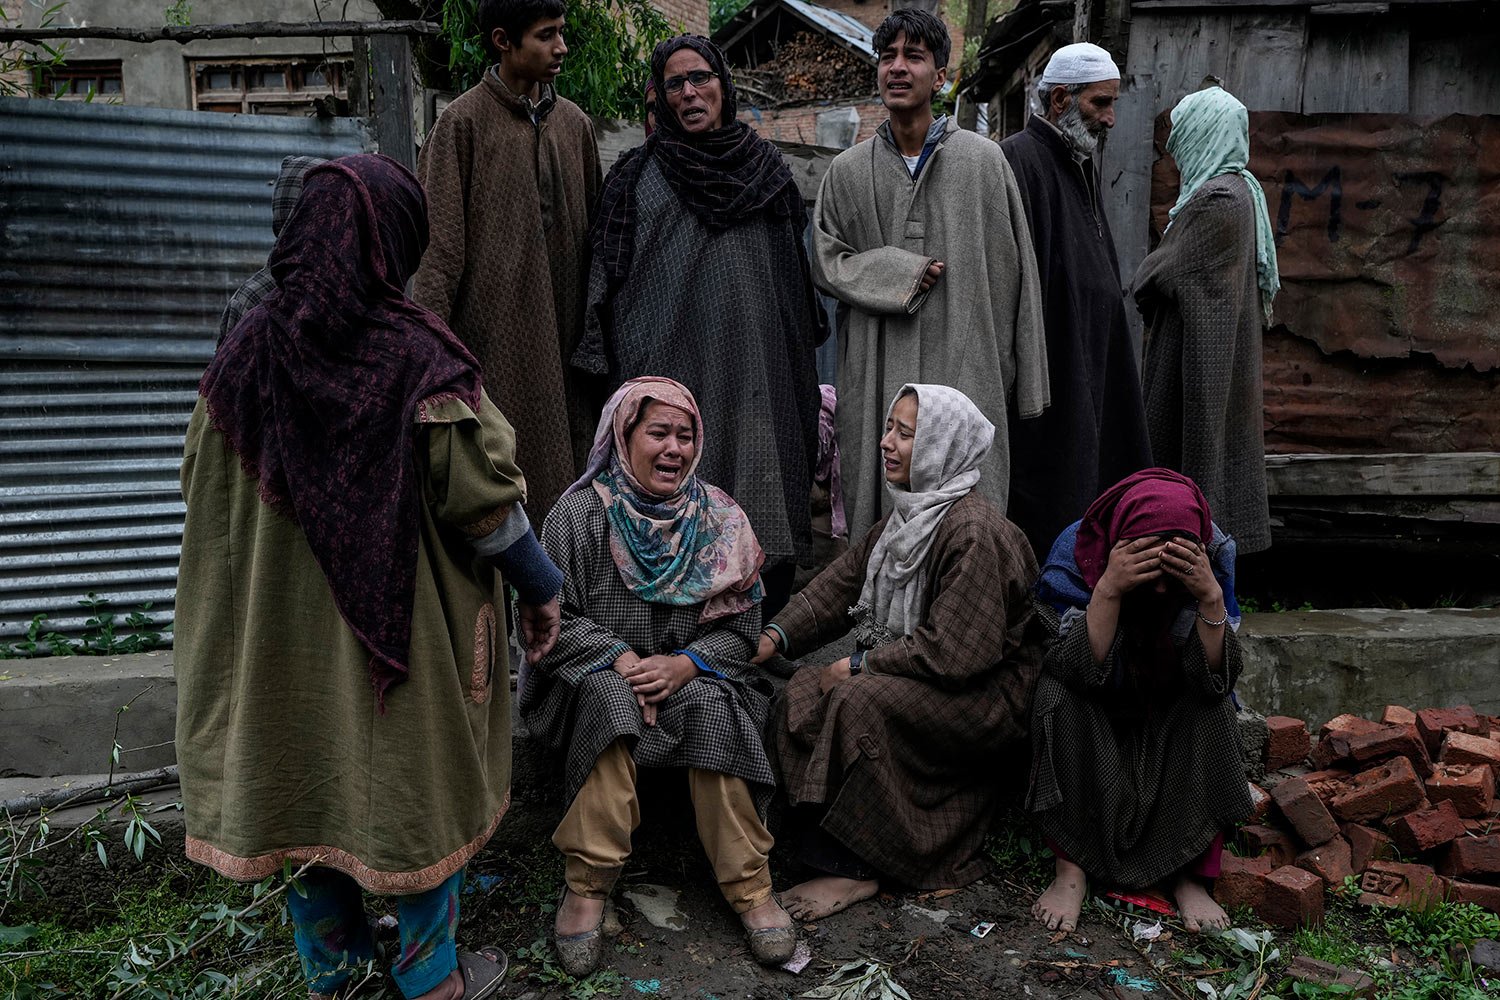  Members of a Kashmiri family mourn the loss after their house was damaged in a gun-battle between government forces and suspected rebels in Malwah village, north of Srinagar, Indian controlled Kashmir, Thursday, April 21, 2022.  (AP Photo/Mukhtar Kh